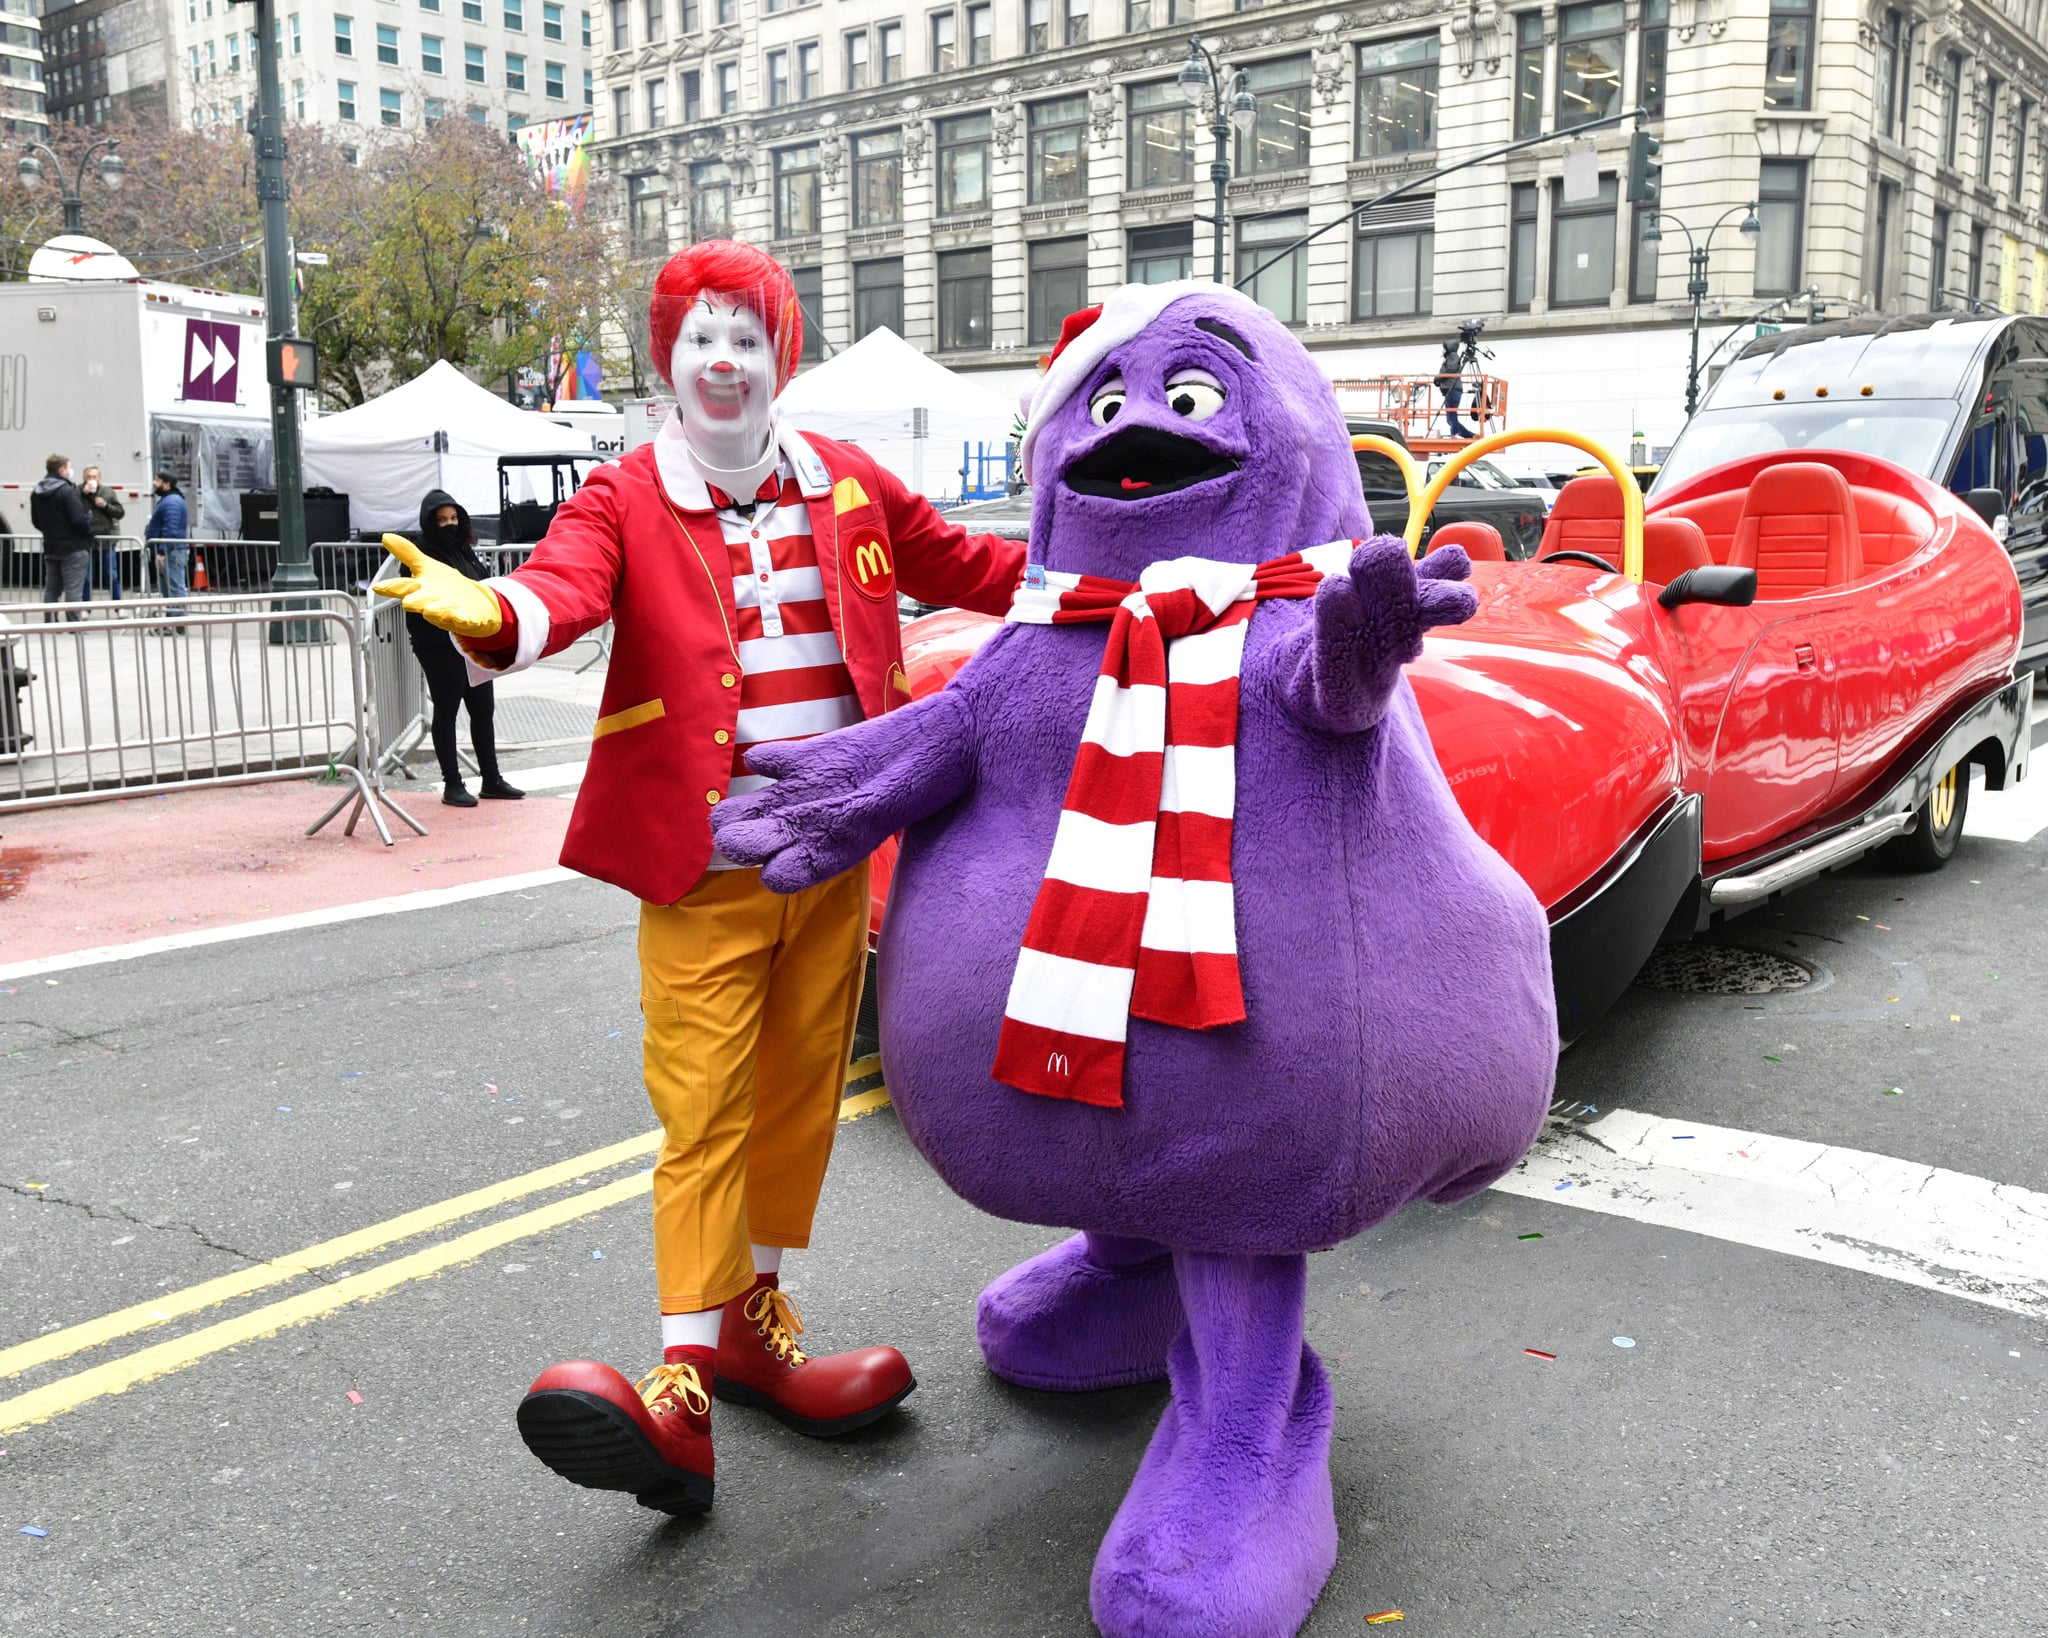 NEW YORK, NEW YORK - NOVEMBER 24: Ronald McDonald (wearing face shield) and Grimace appear in the 94th Annual Macy's Thanksgiving Day Parade¨ on November 24, 2020 in New York City. The World-Famous Macy's Thanksgiving Day Parade¨ kicks off the holiday season for millions of television viewers watching safely at home. (Photo by Eugene Gologursky/Getty Images for Macy's, Inc.)